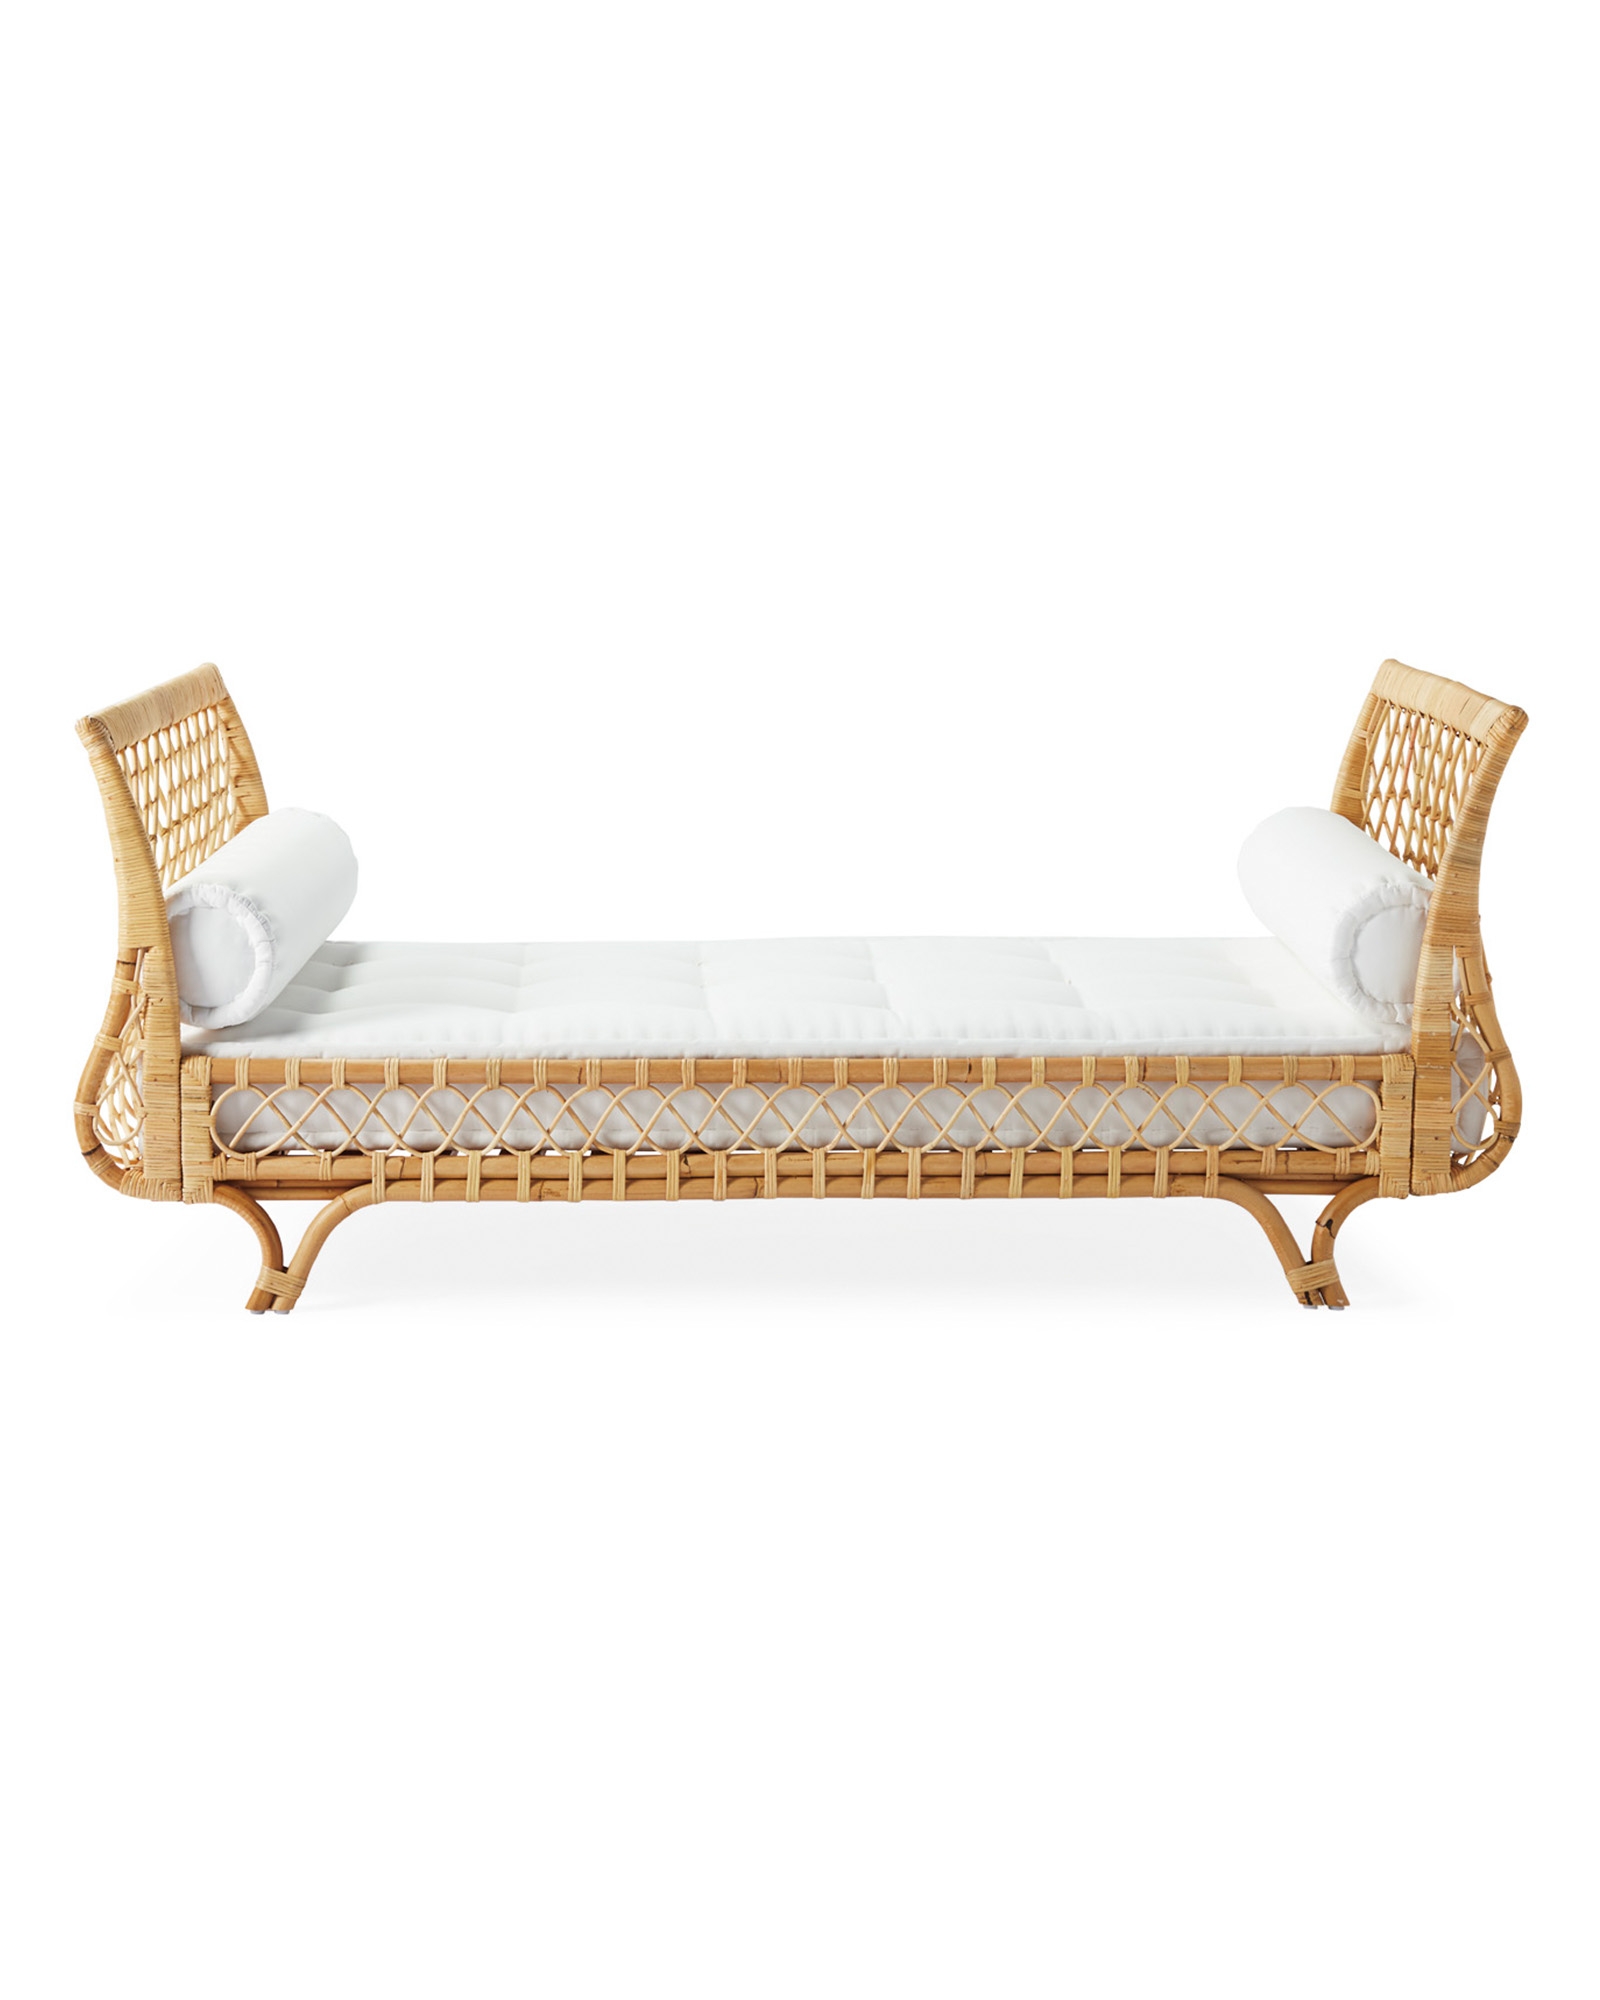 Avalon Daybed - Image 1